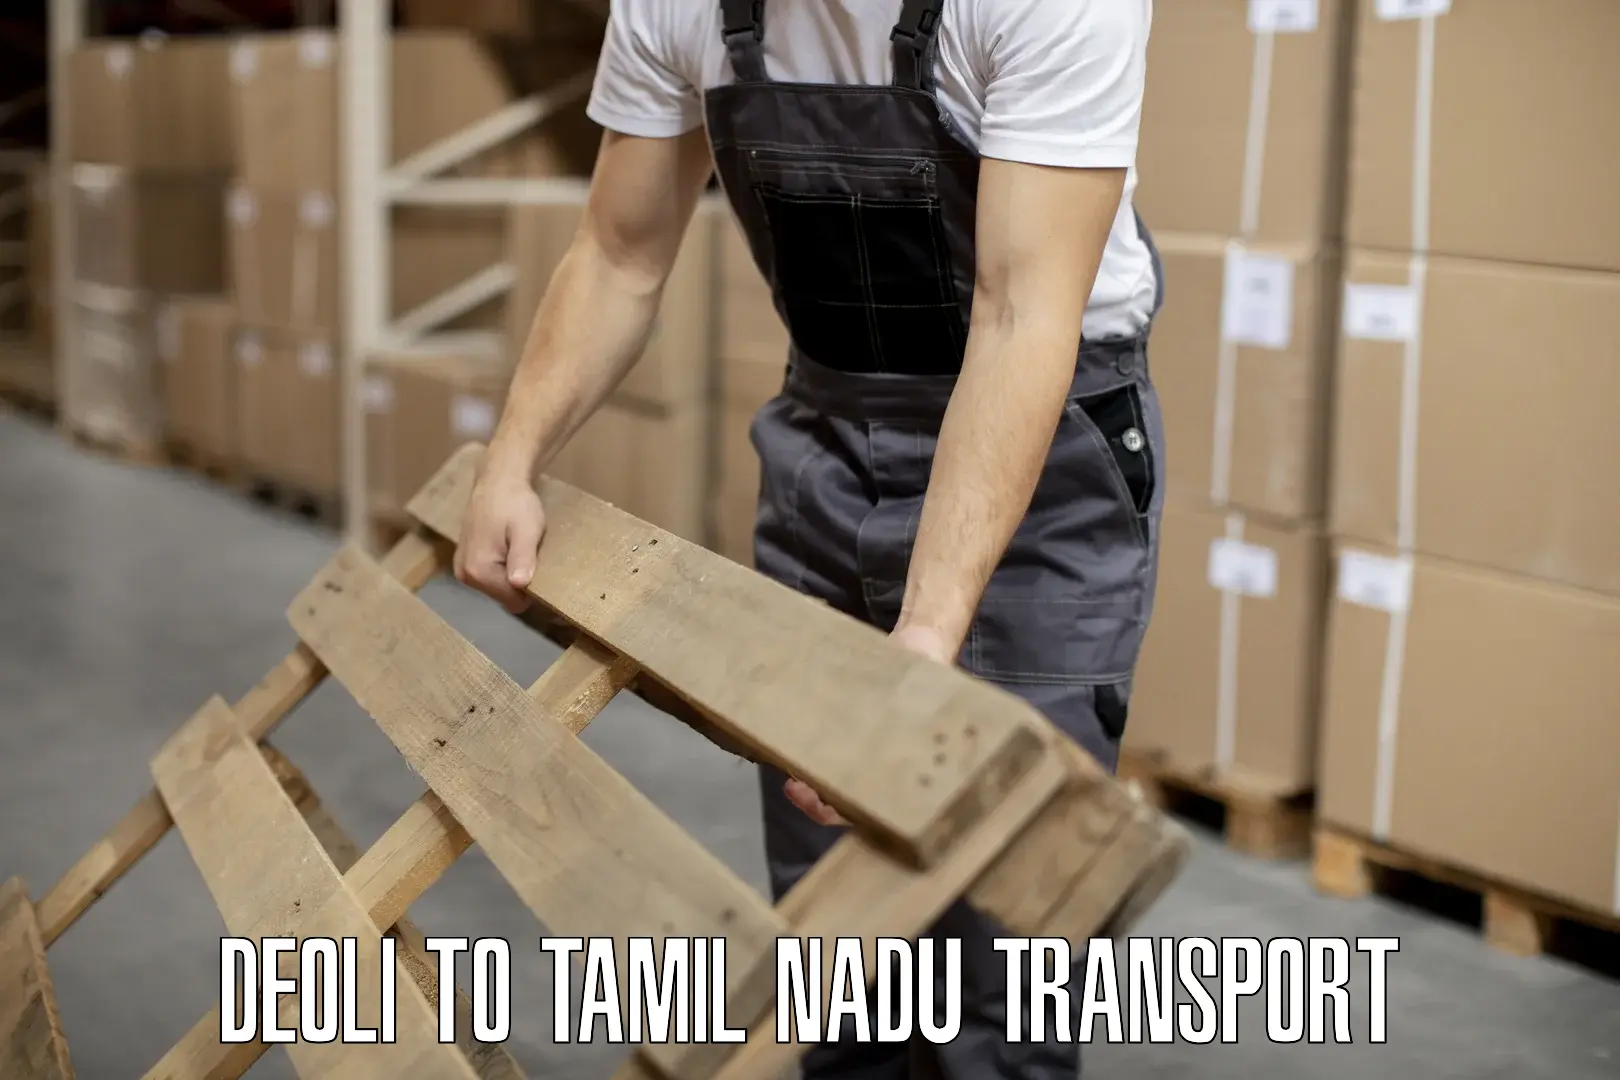 Container transport service Deoli to Tamil Nadu